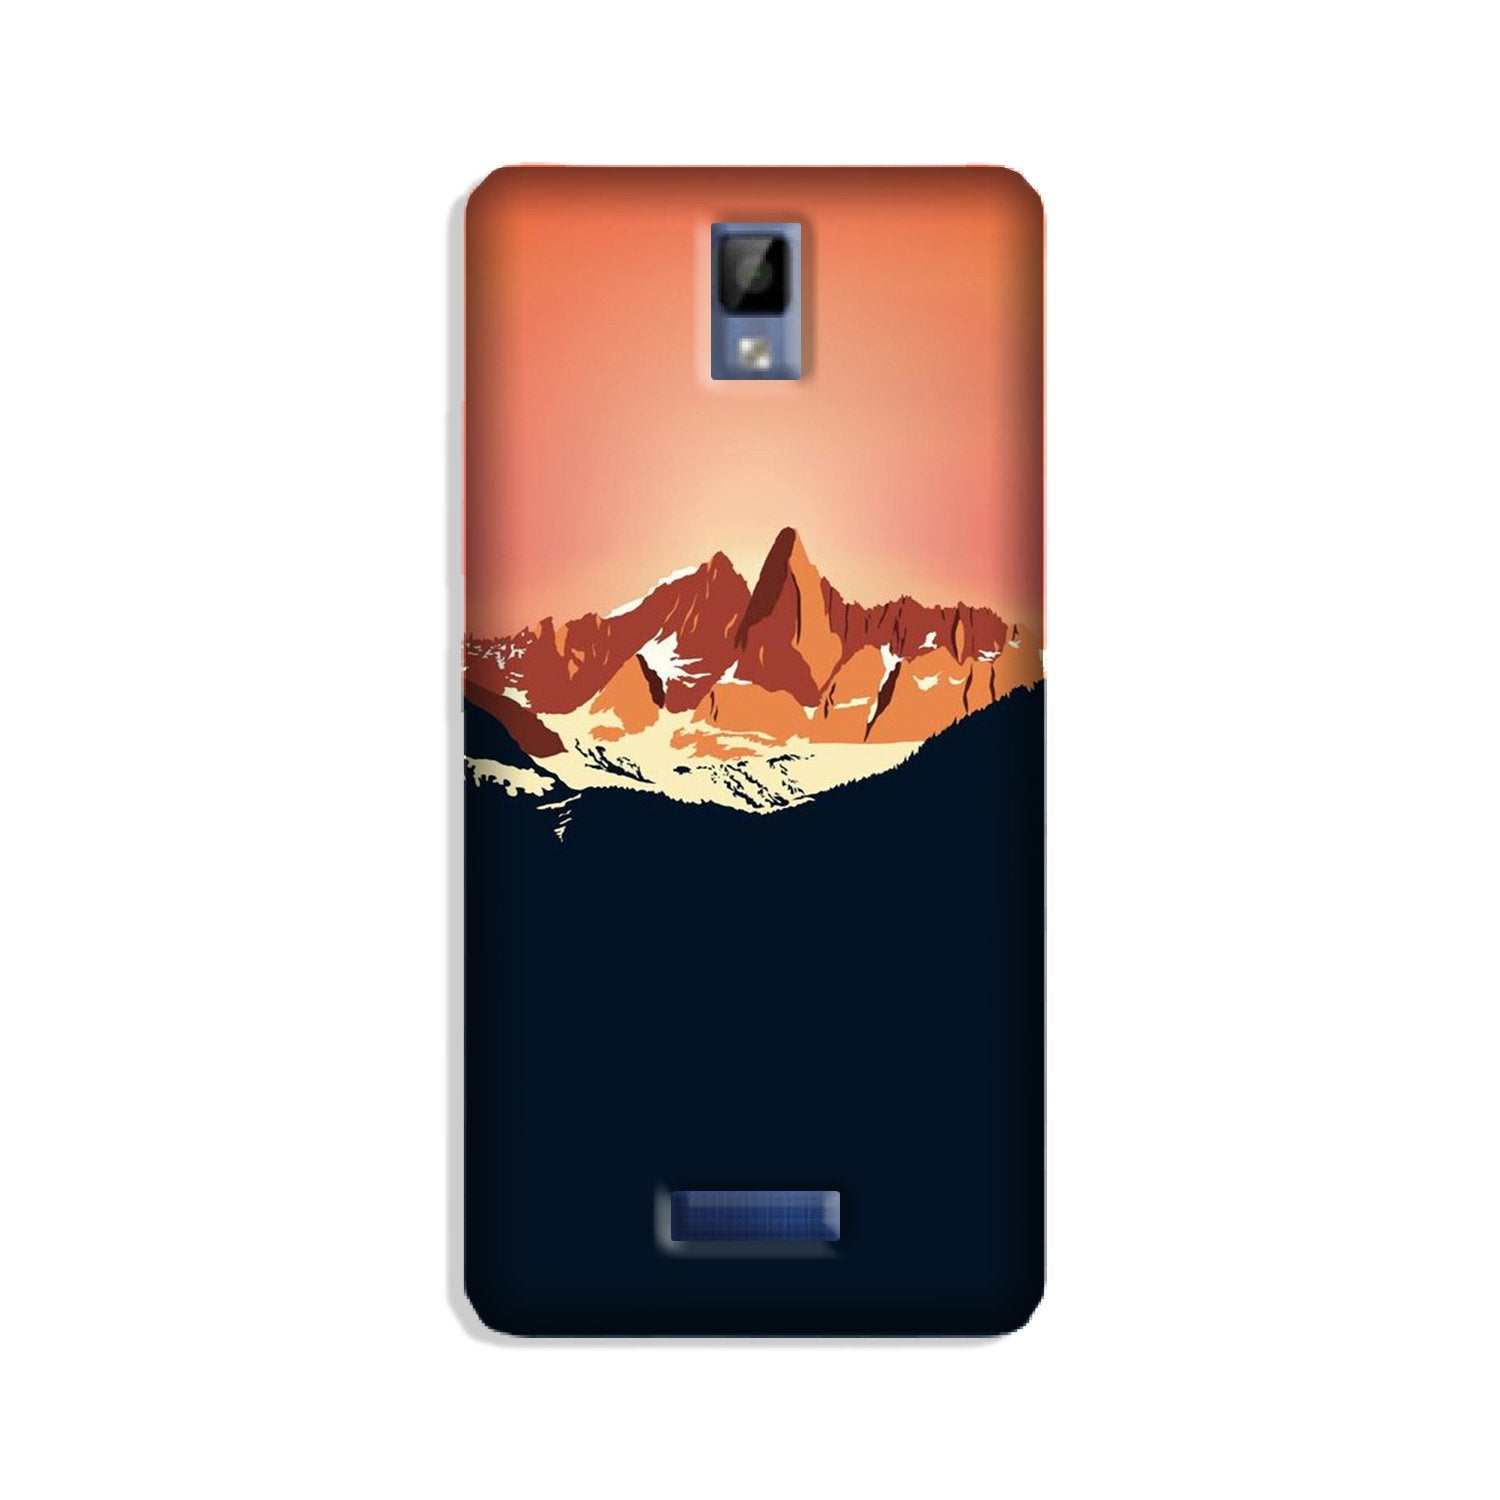 Mountains Case for Gionee P7 (Design No. 227)